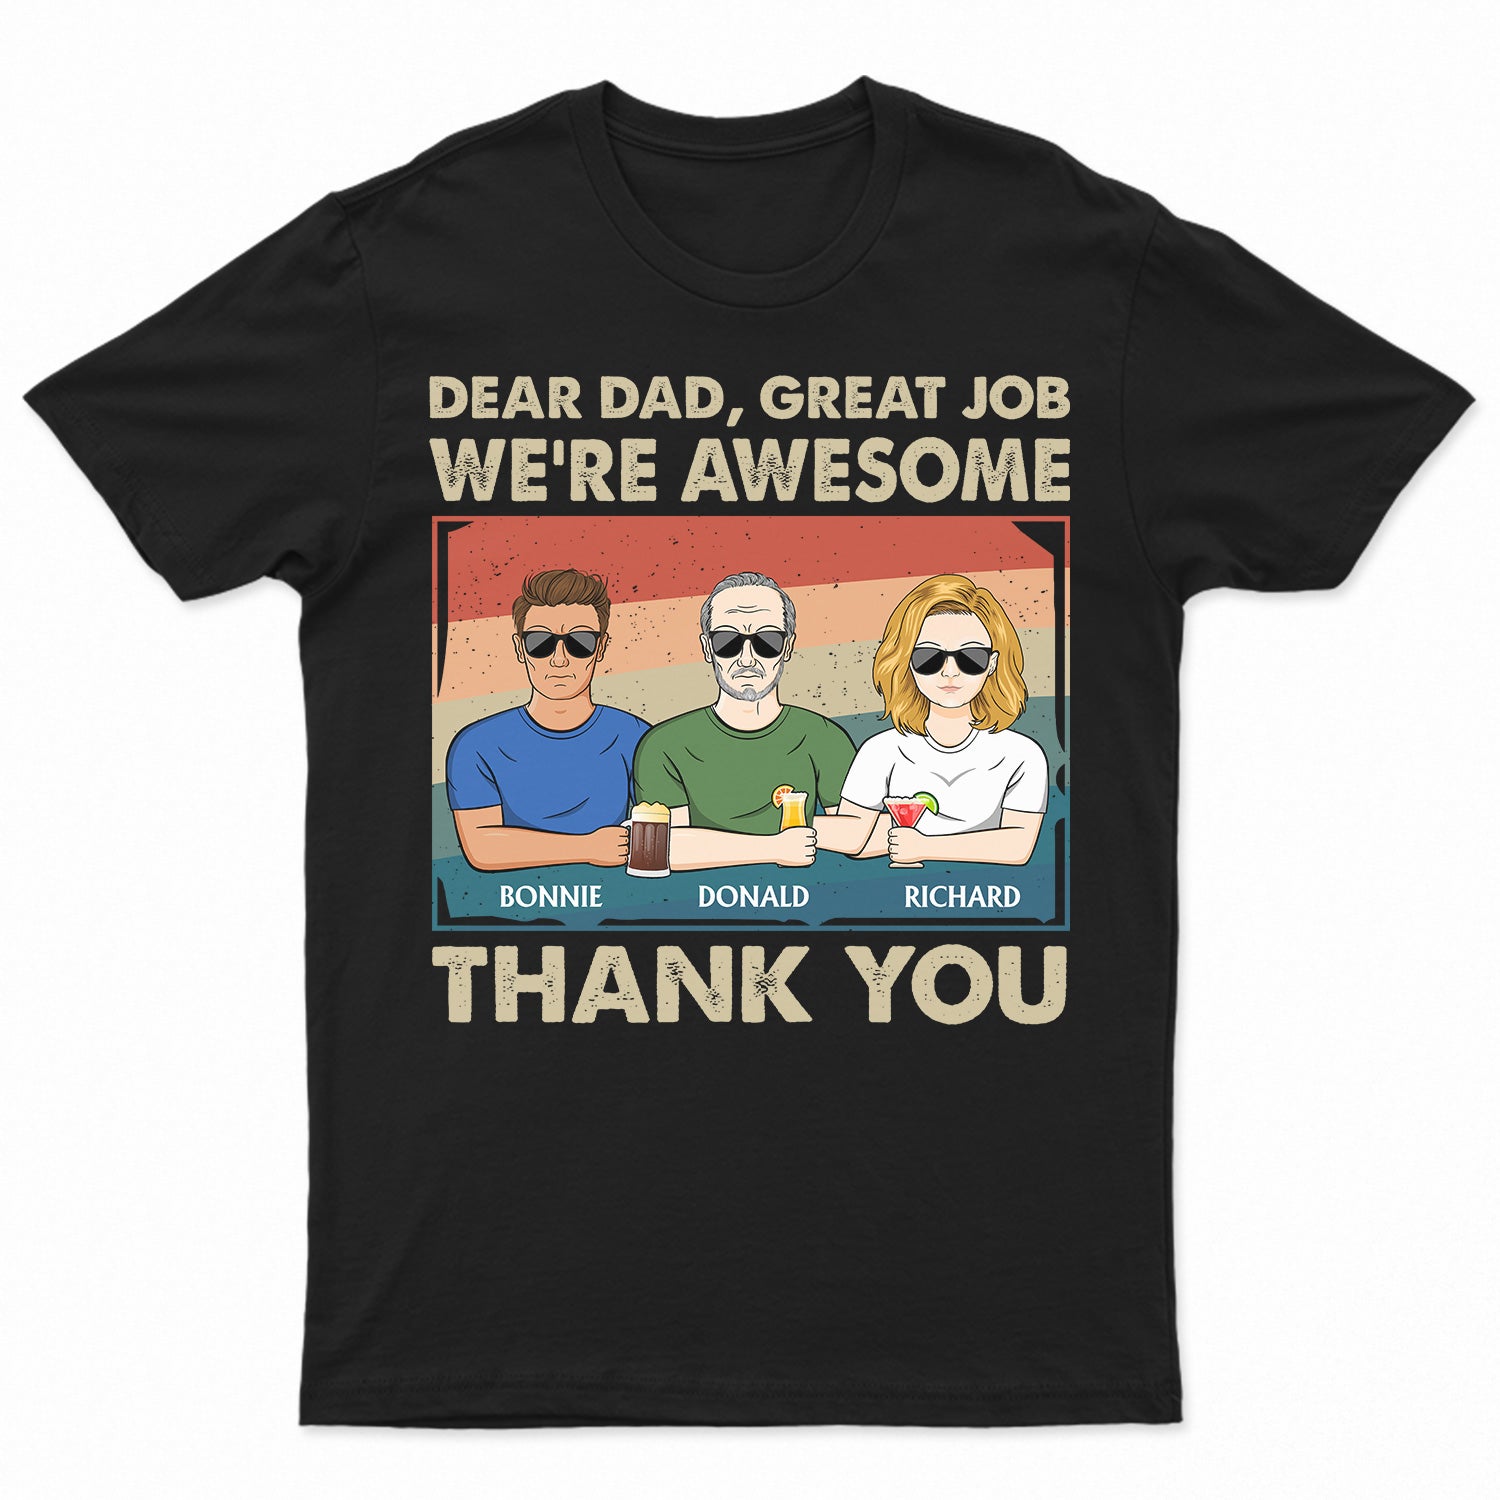 Great Job We're Awesome Thank You - Funny Gift For Dad, Father, Papa, Grandpa - Personalized T Shirt